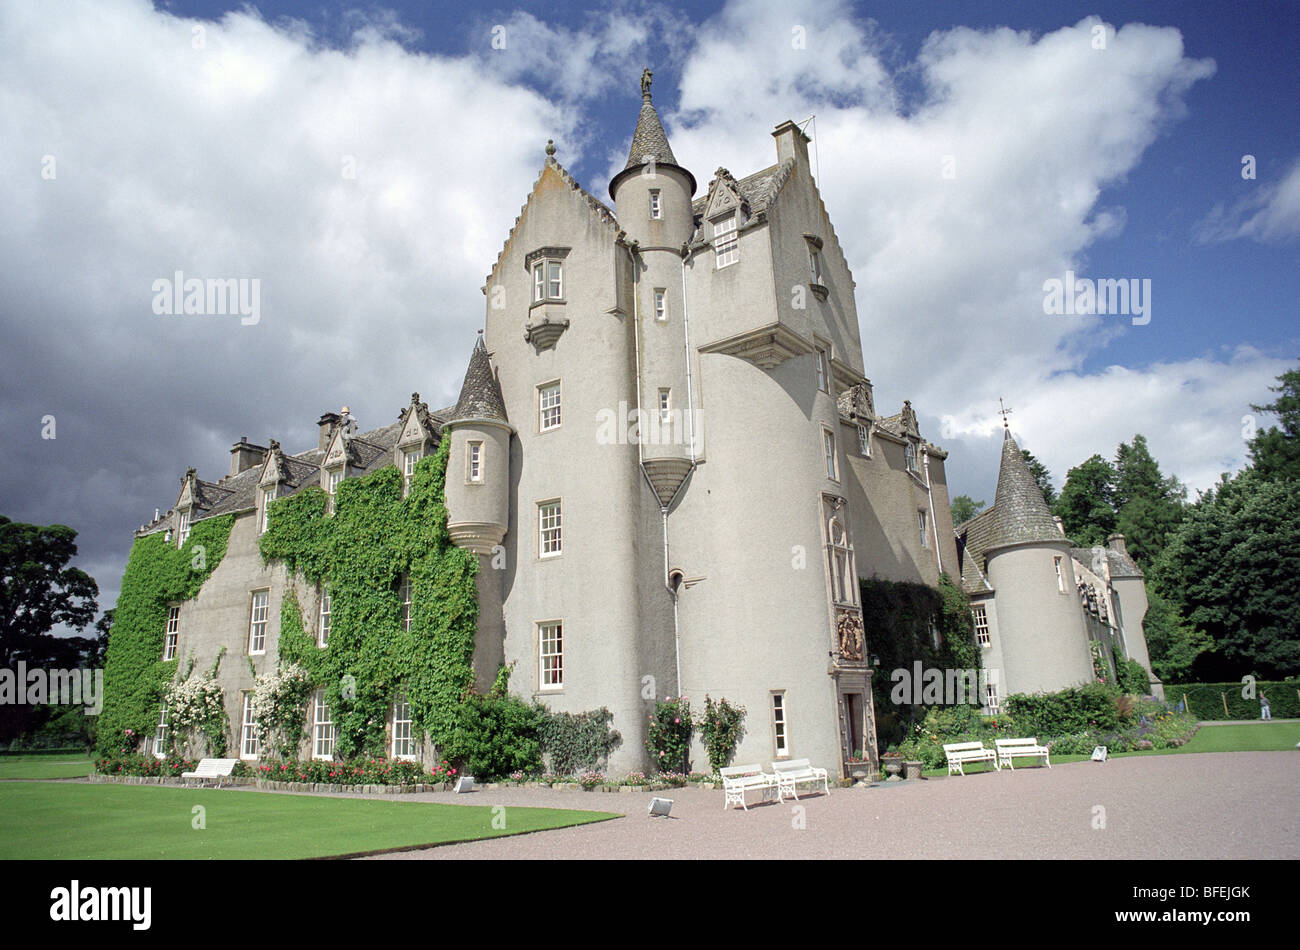 Ballindalloch Castle (also known as The Pearl of the North)  castle near Grantown-on-Spey, in the Moray region of scotland Stock Photo